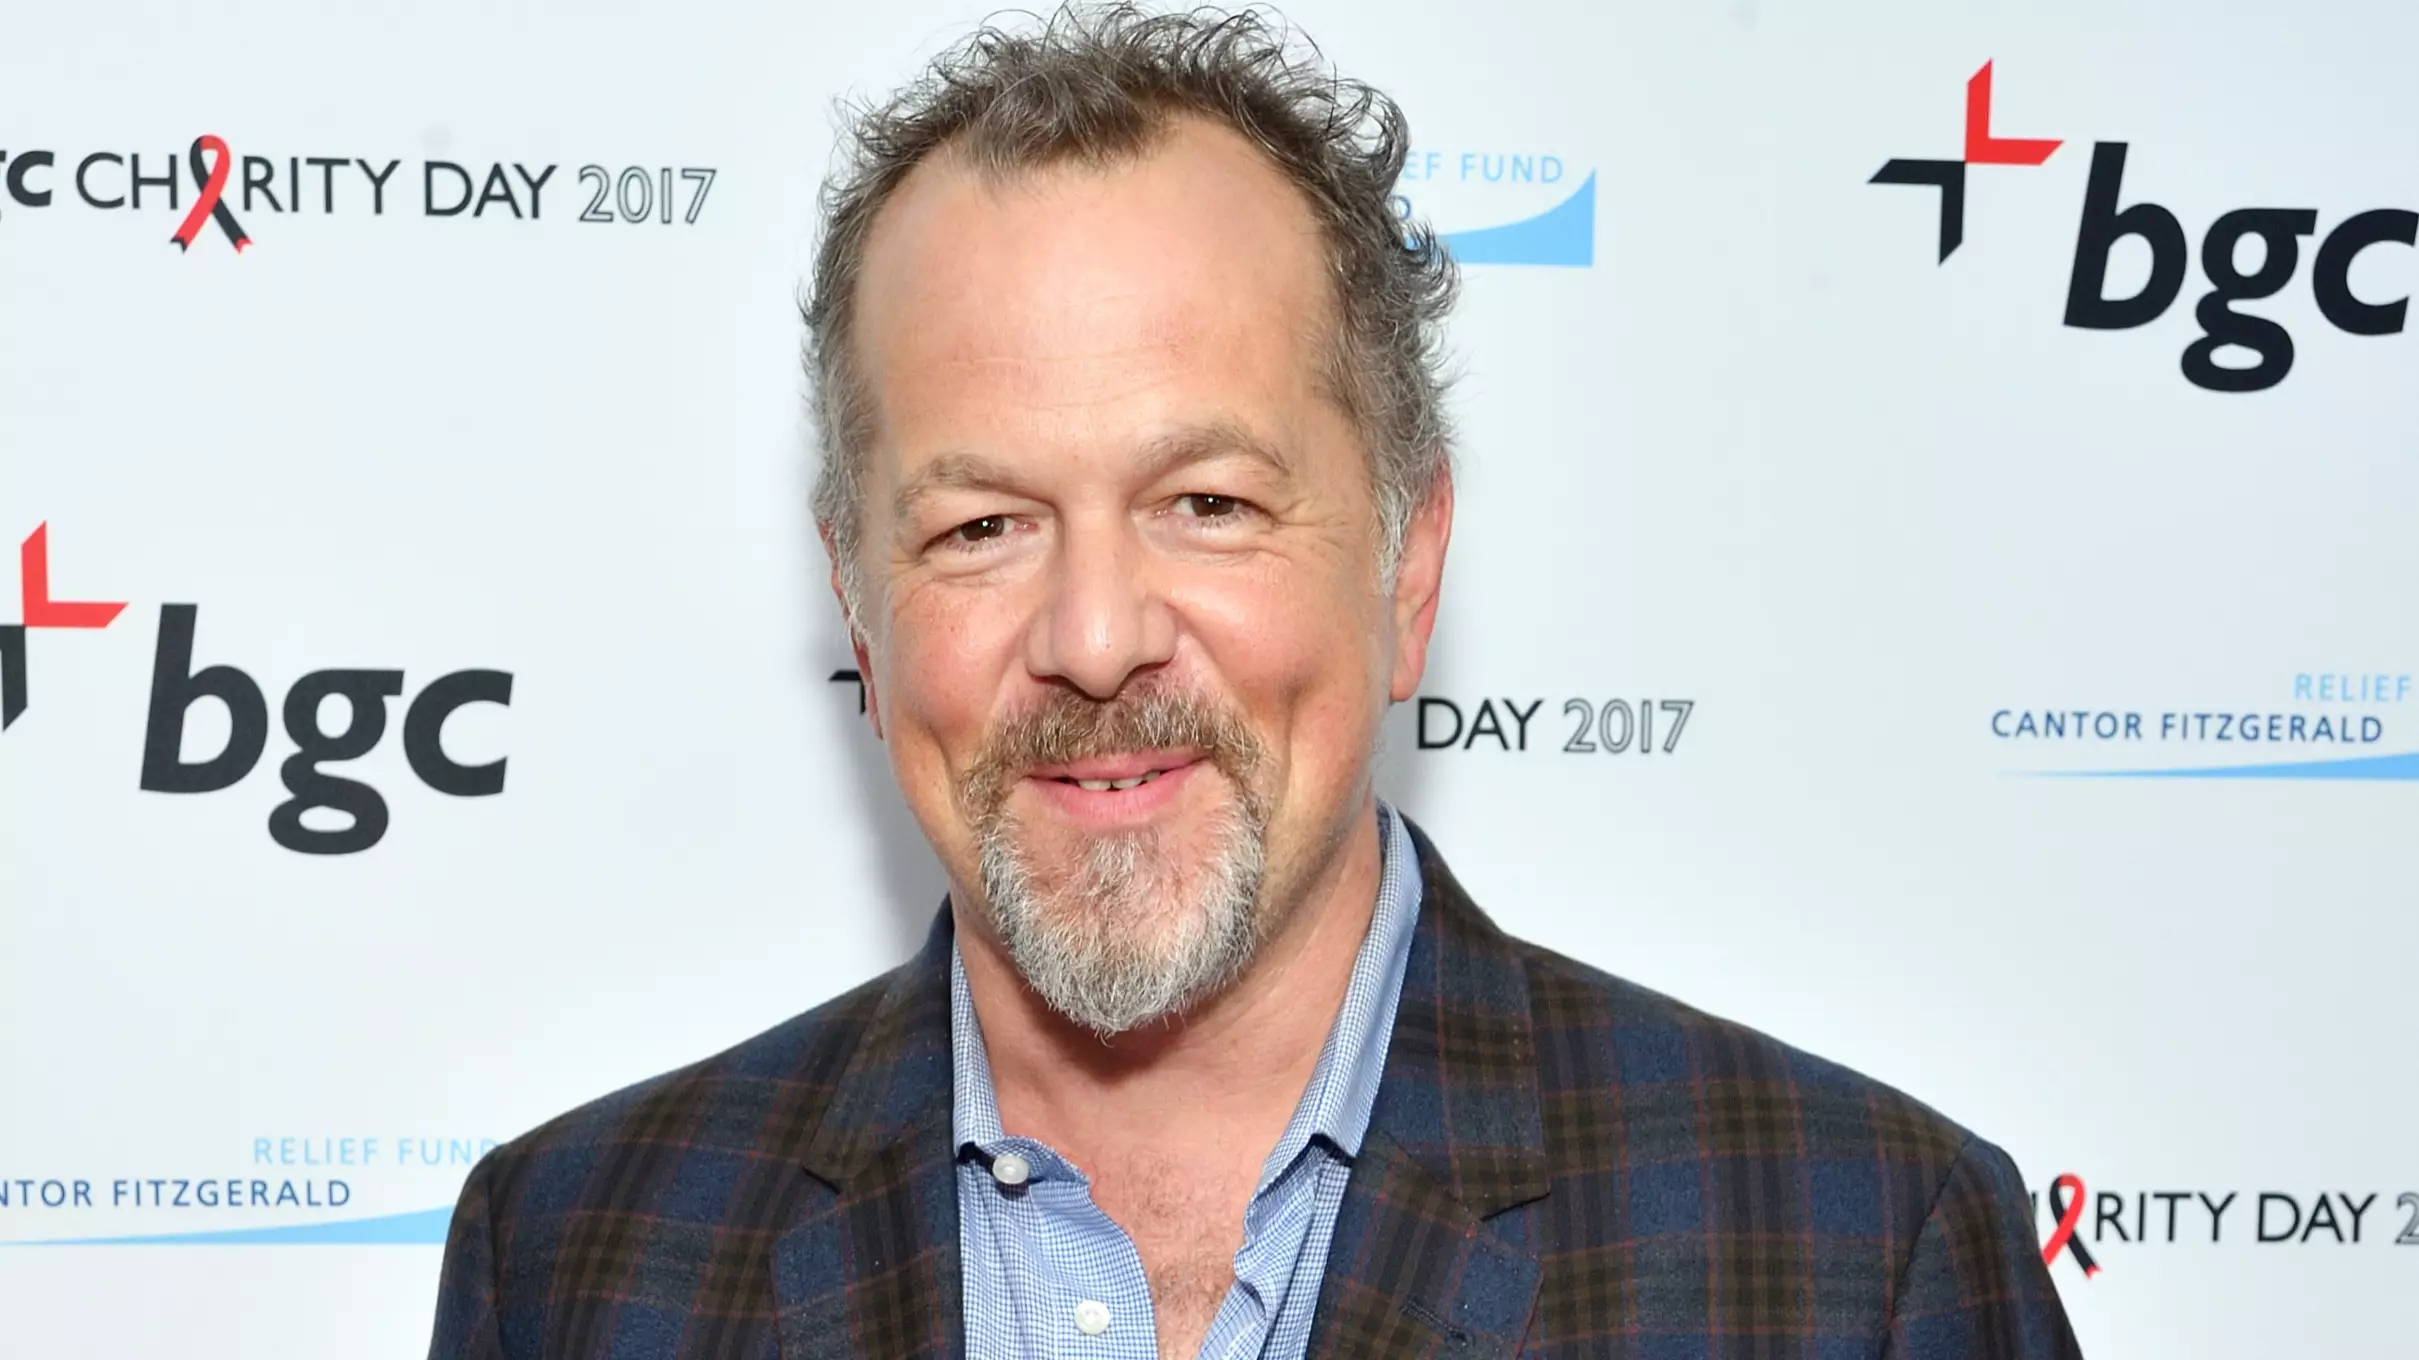 Suits Star David Costabile Beats A-List Line-up In PokerStars' $1m Live Stream Event